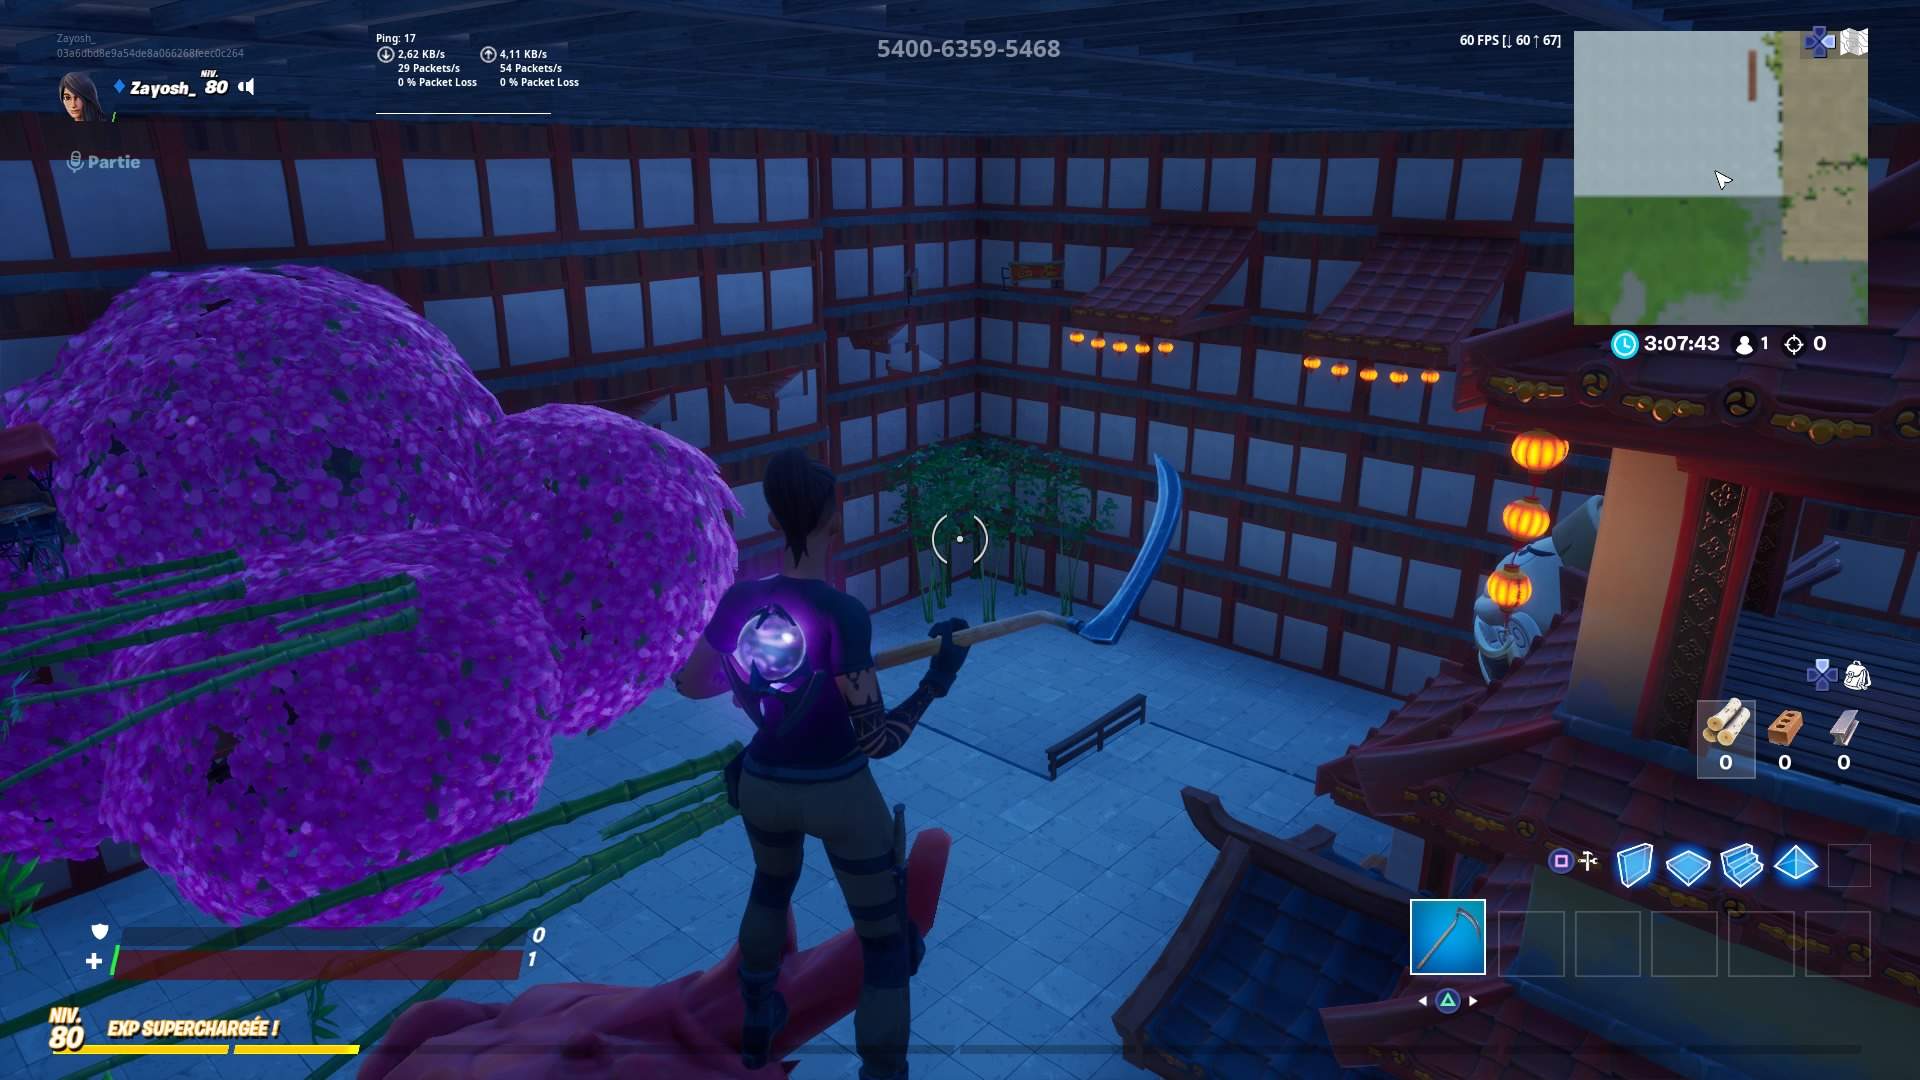 Dreamcore Rooftop 2389-8984-8926 by pawersmile - Fortnite Creative Map Code  